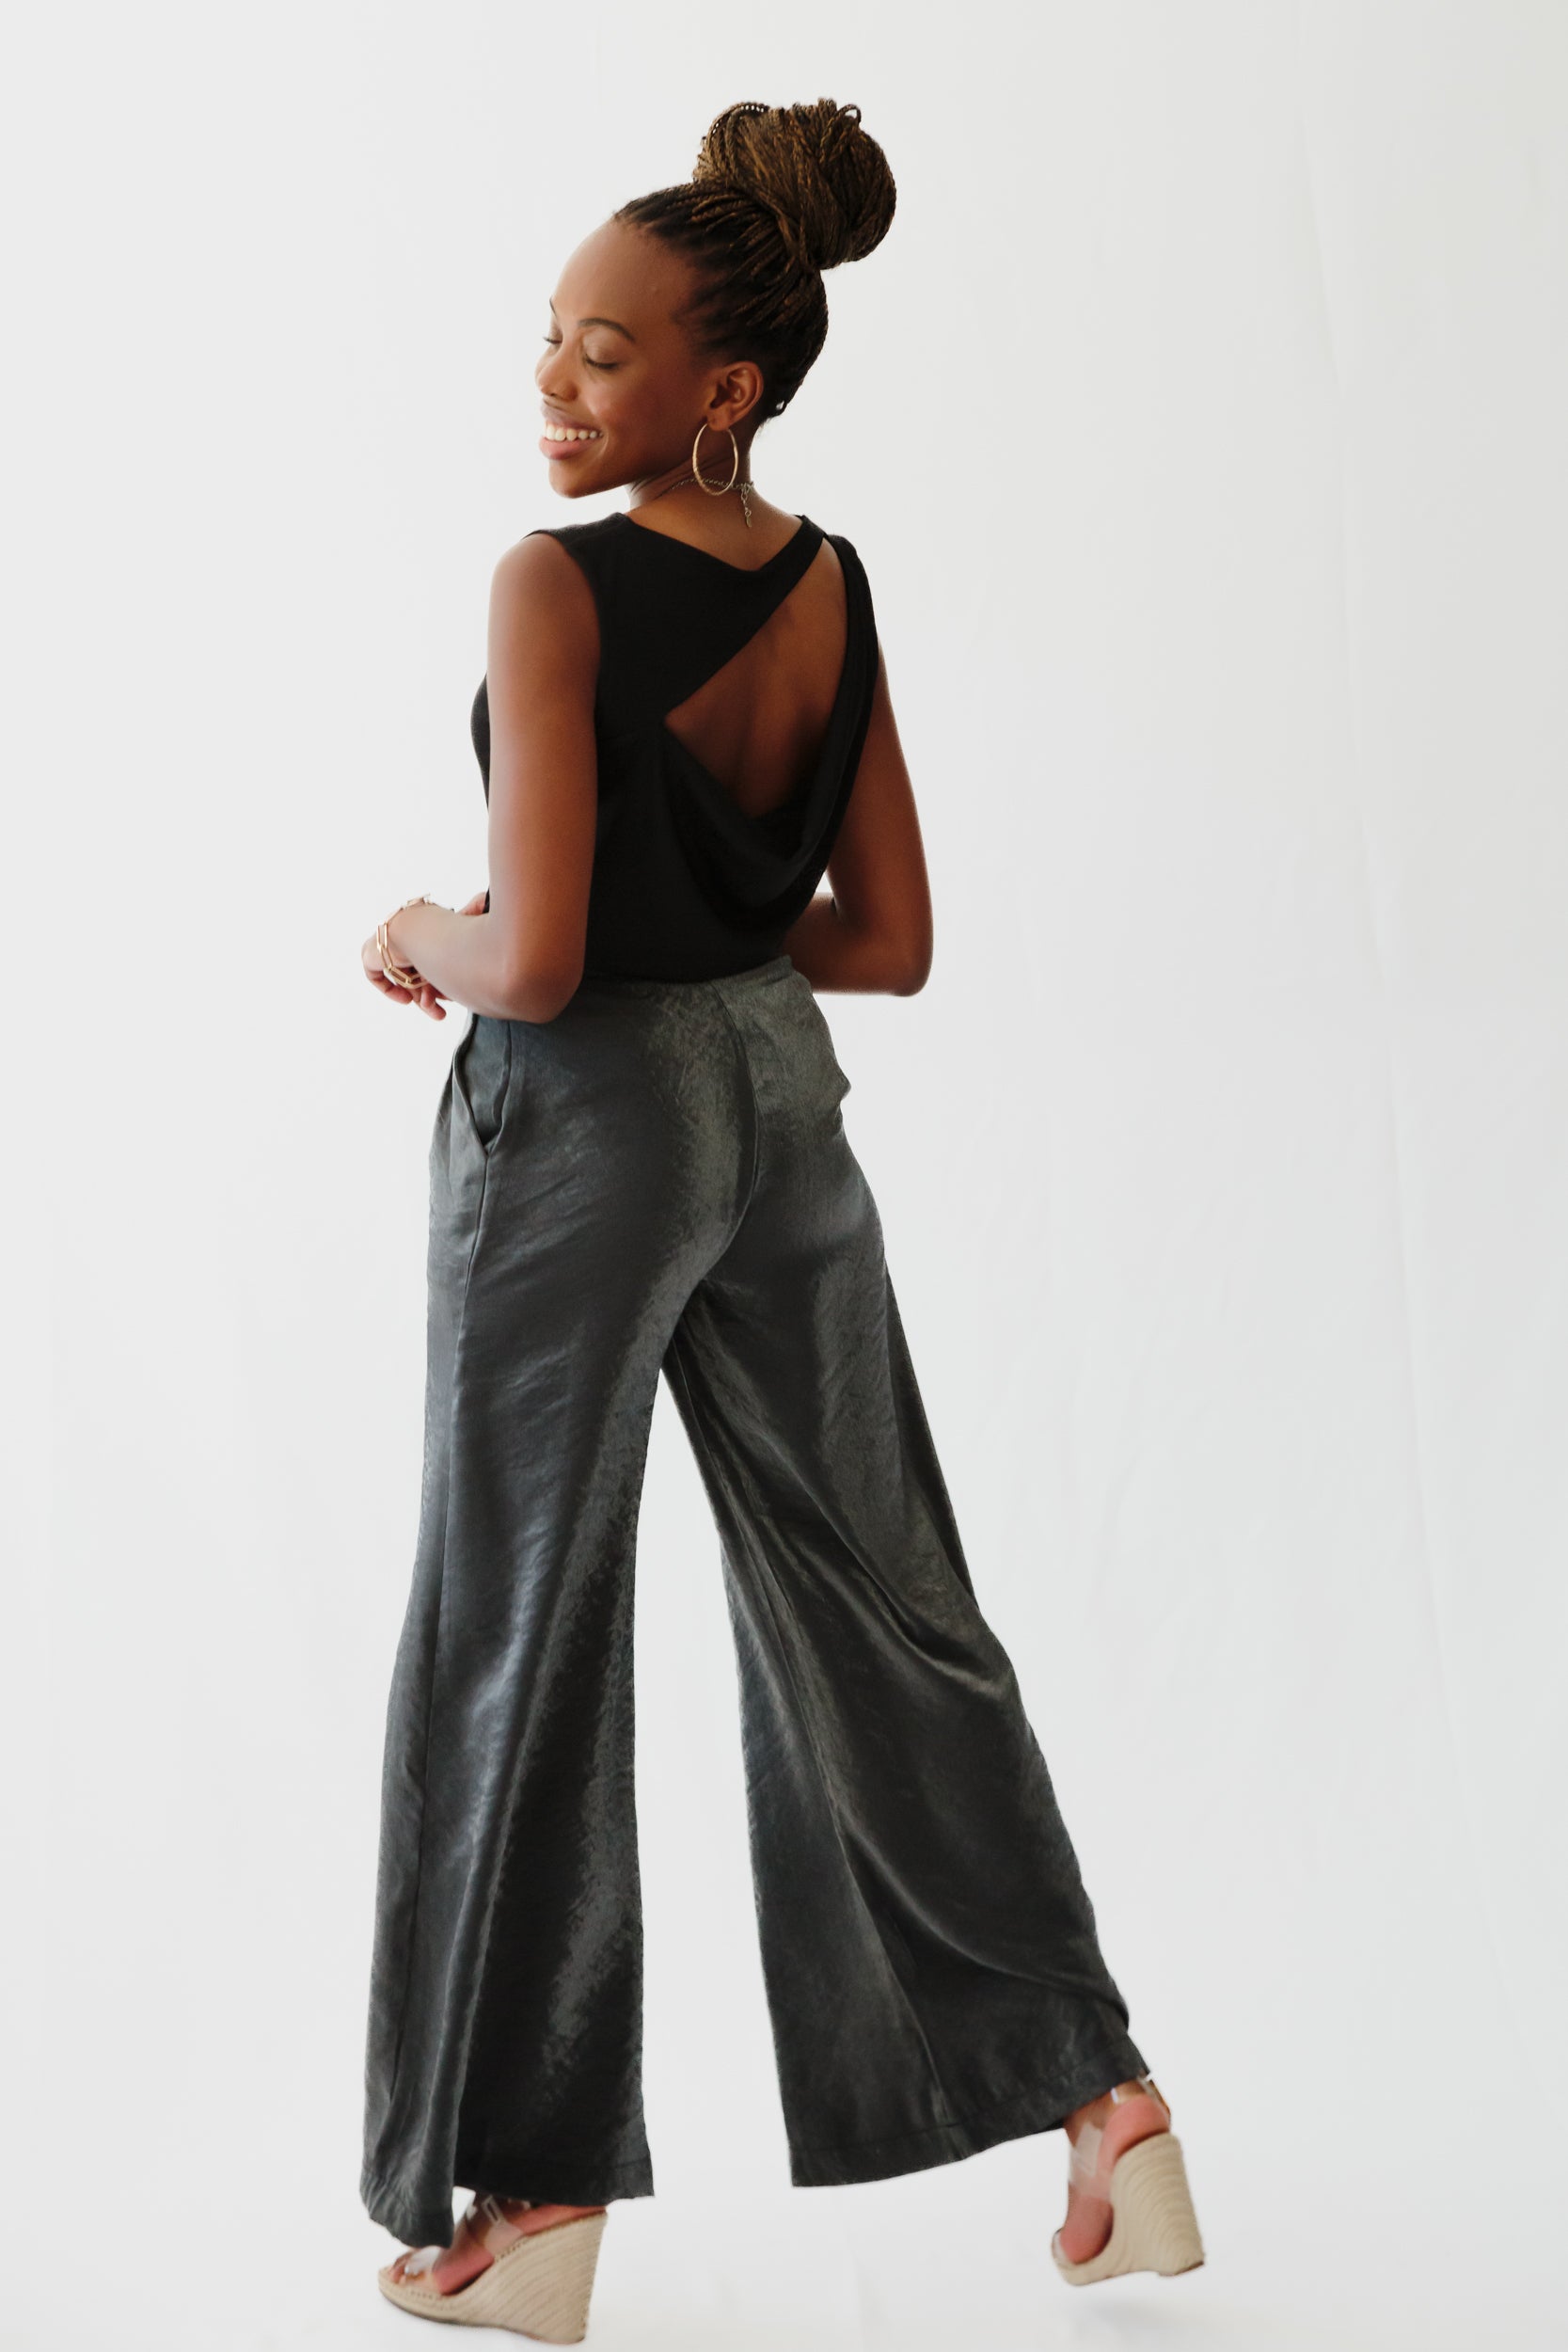 Harlow Glitter Tailored Pant - Women's Fashion | Forever New